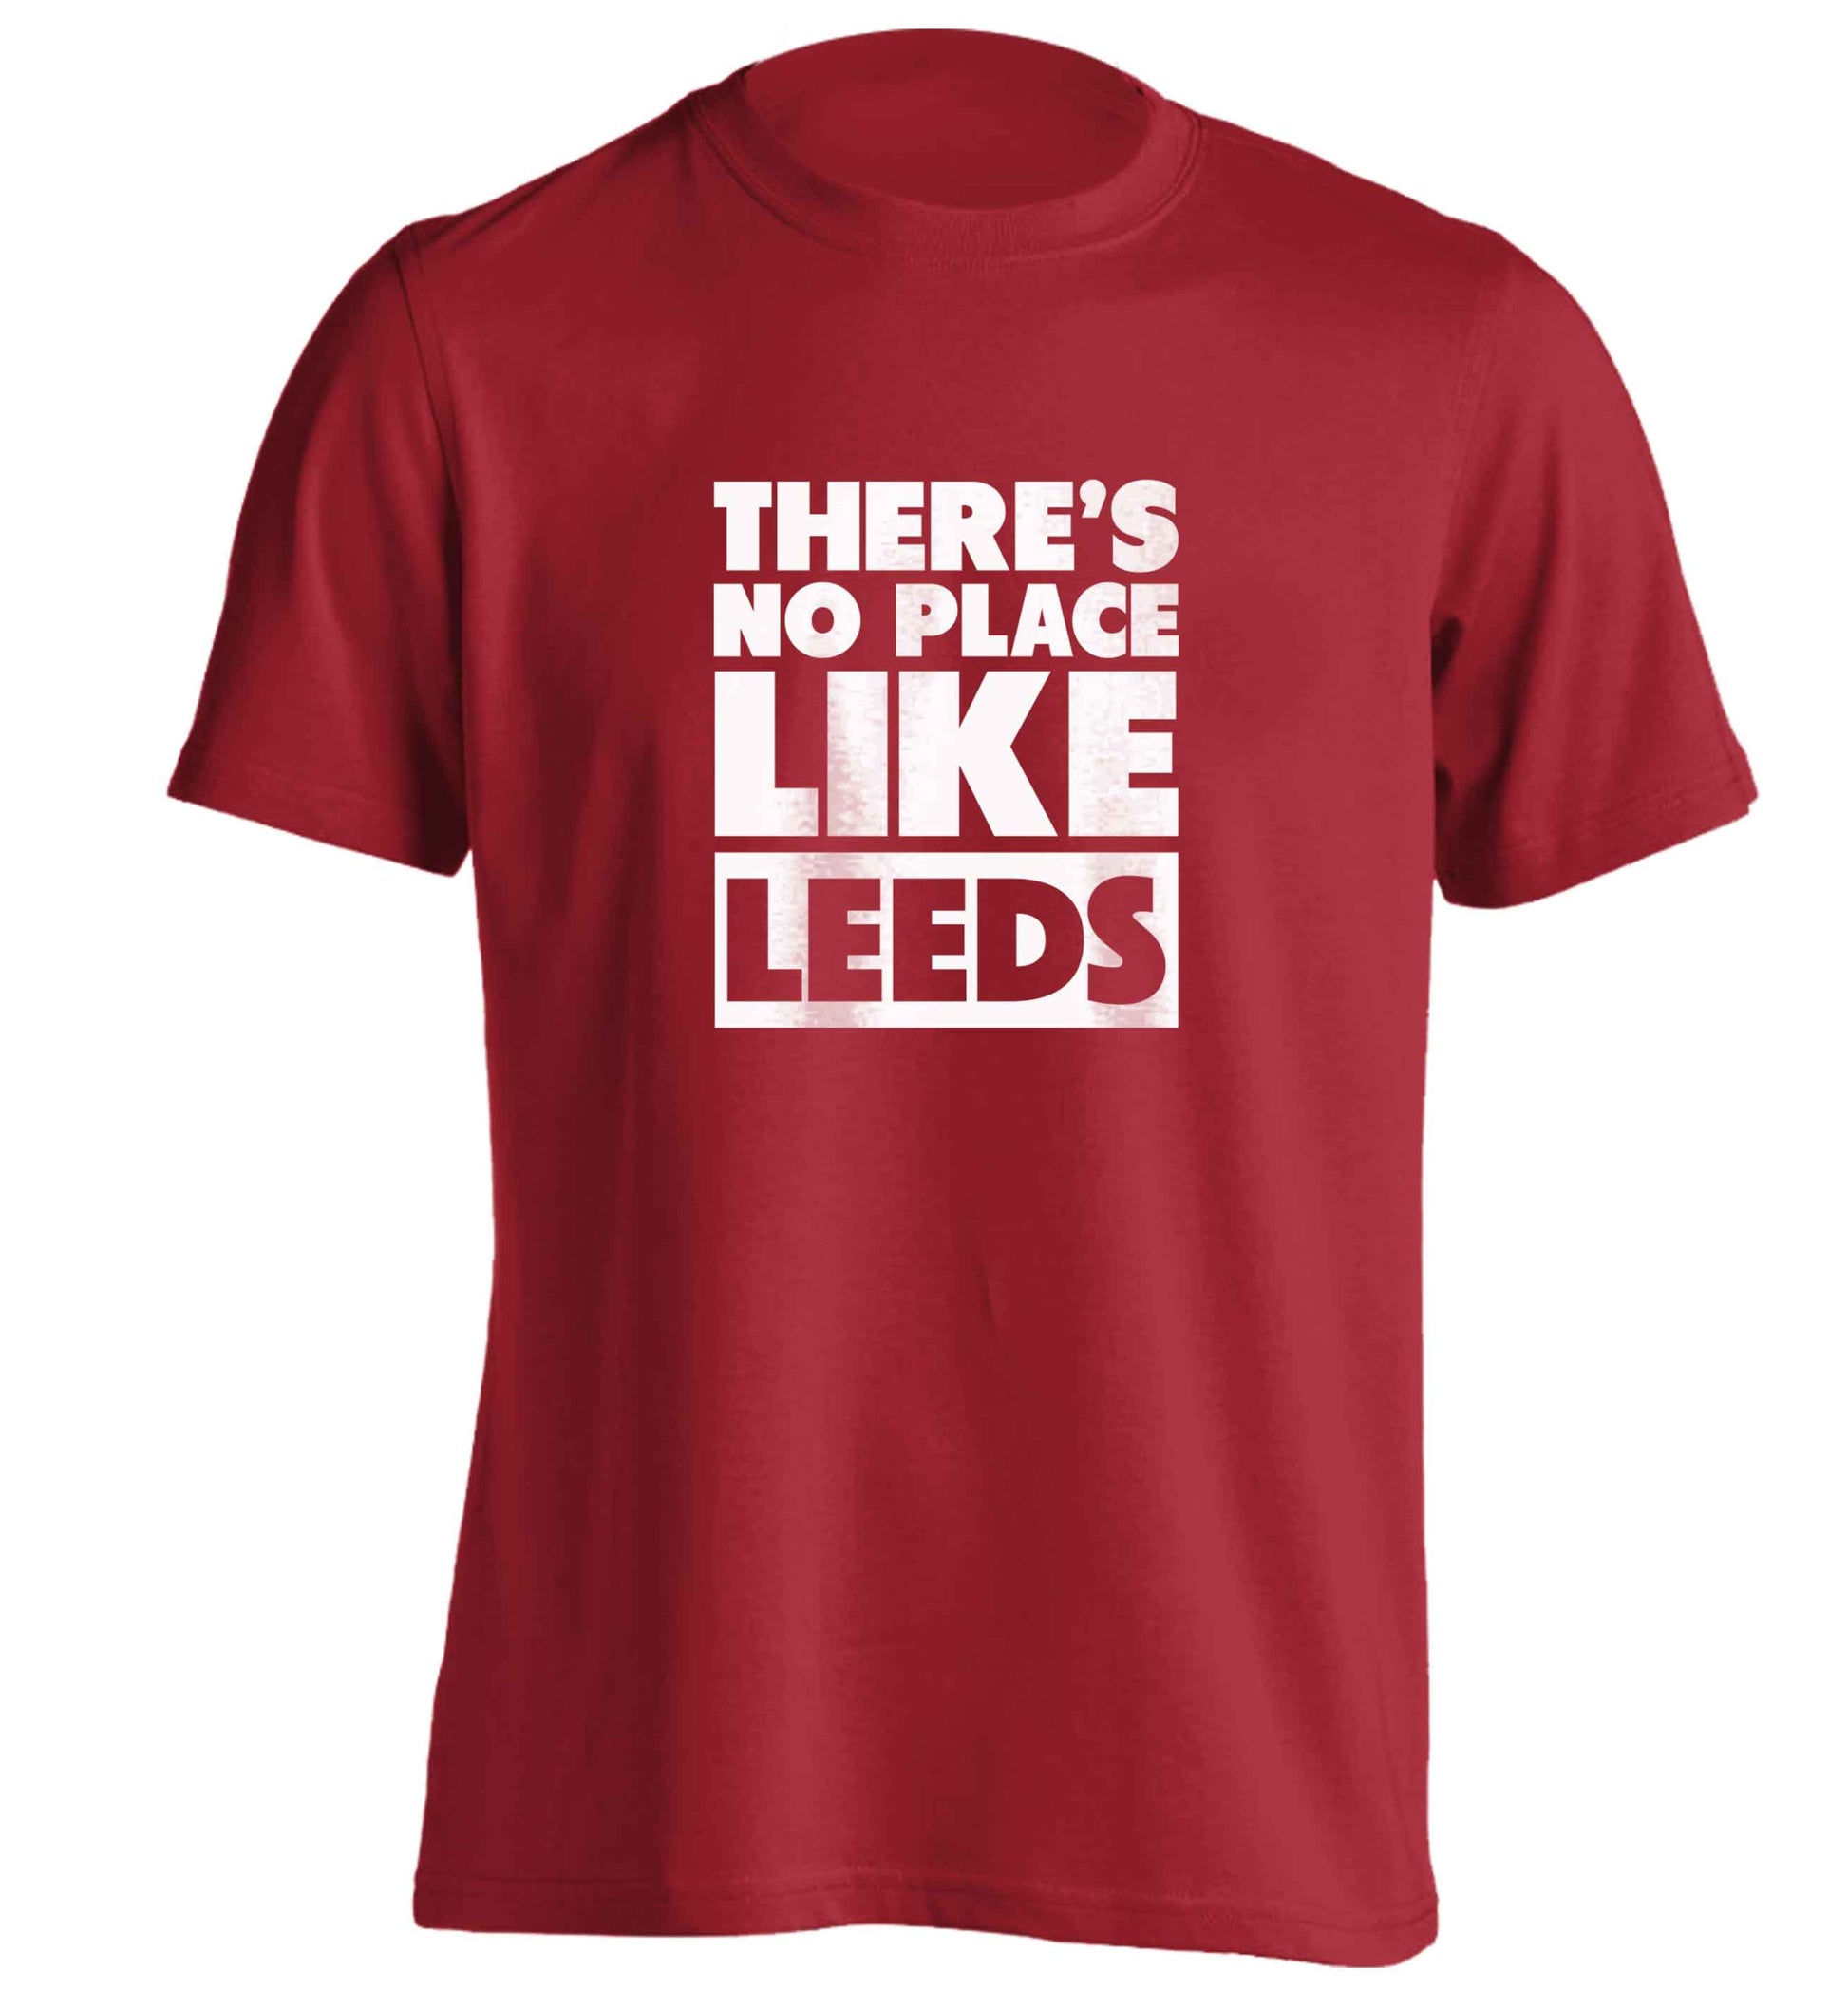 There's no place like Leeds adults unisex red Tshirt 2XL